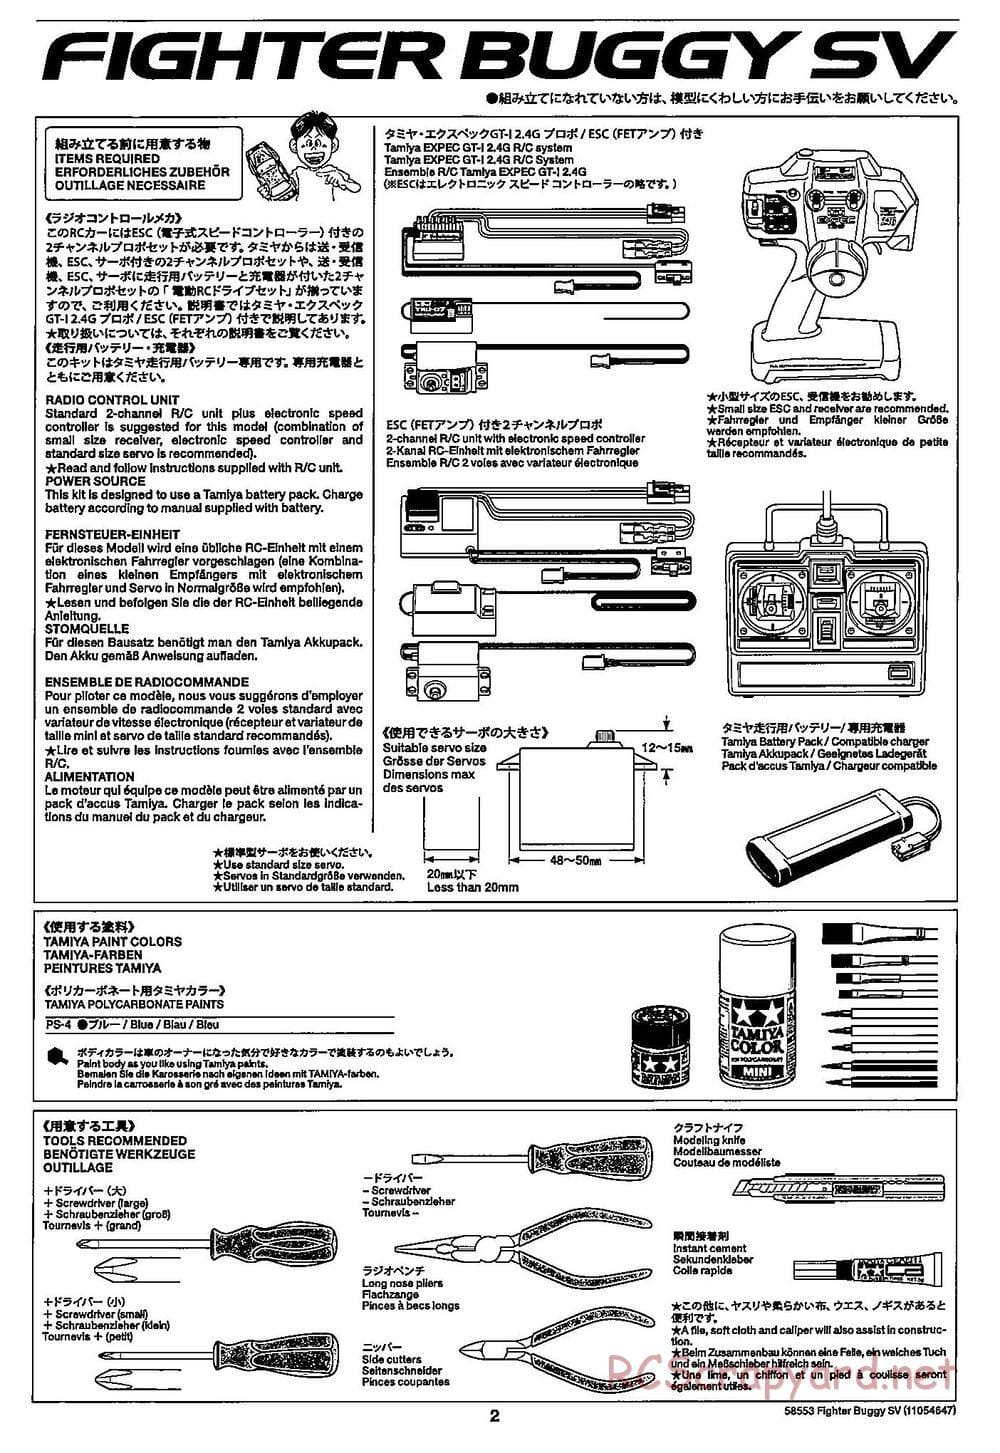 Tamiya - Fighter Buggy SV Chassis - Manual - Page 2